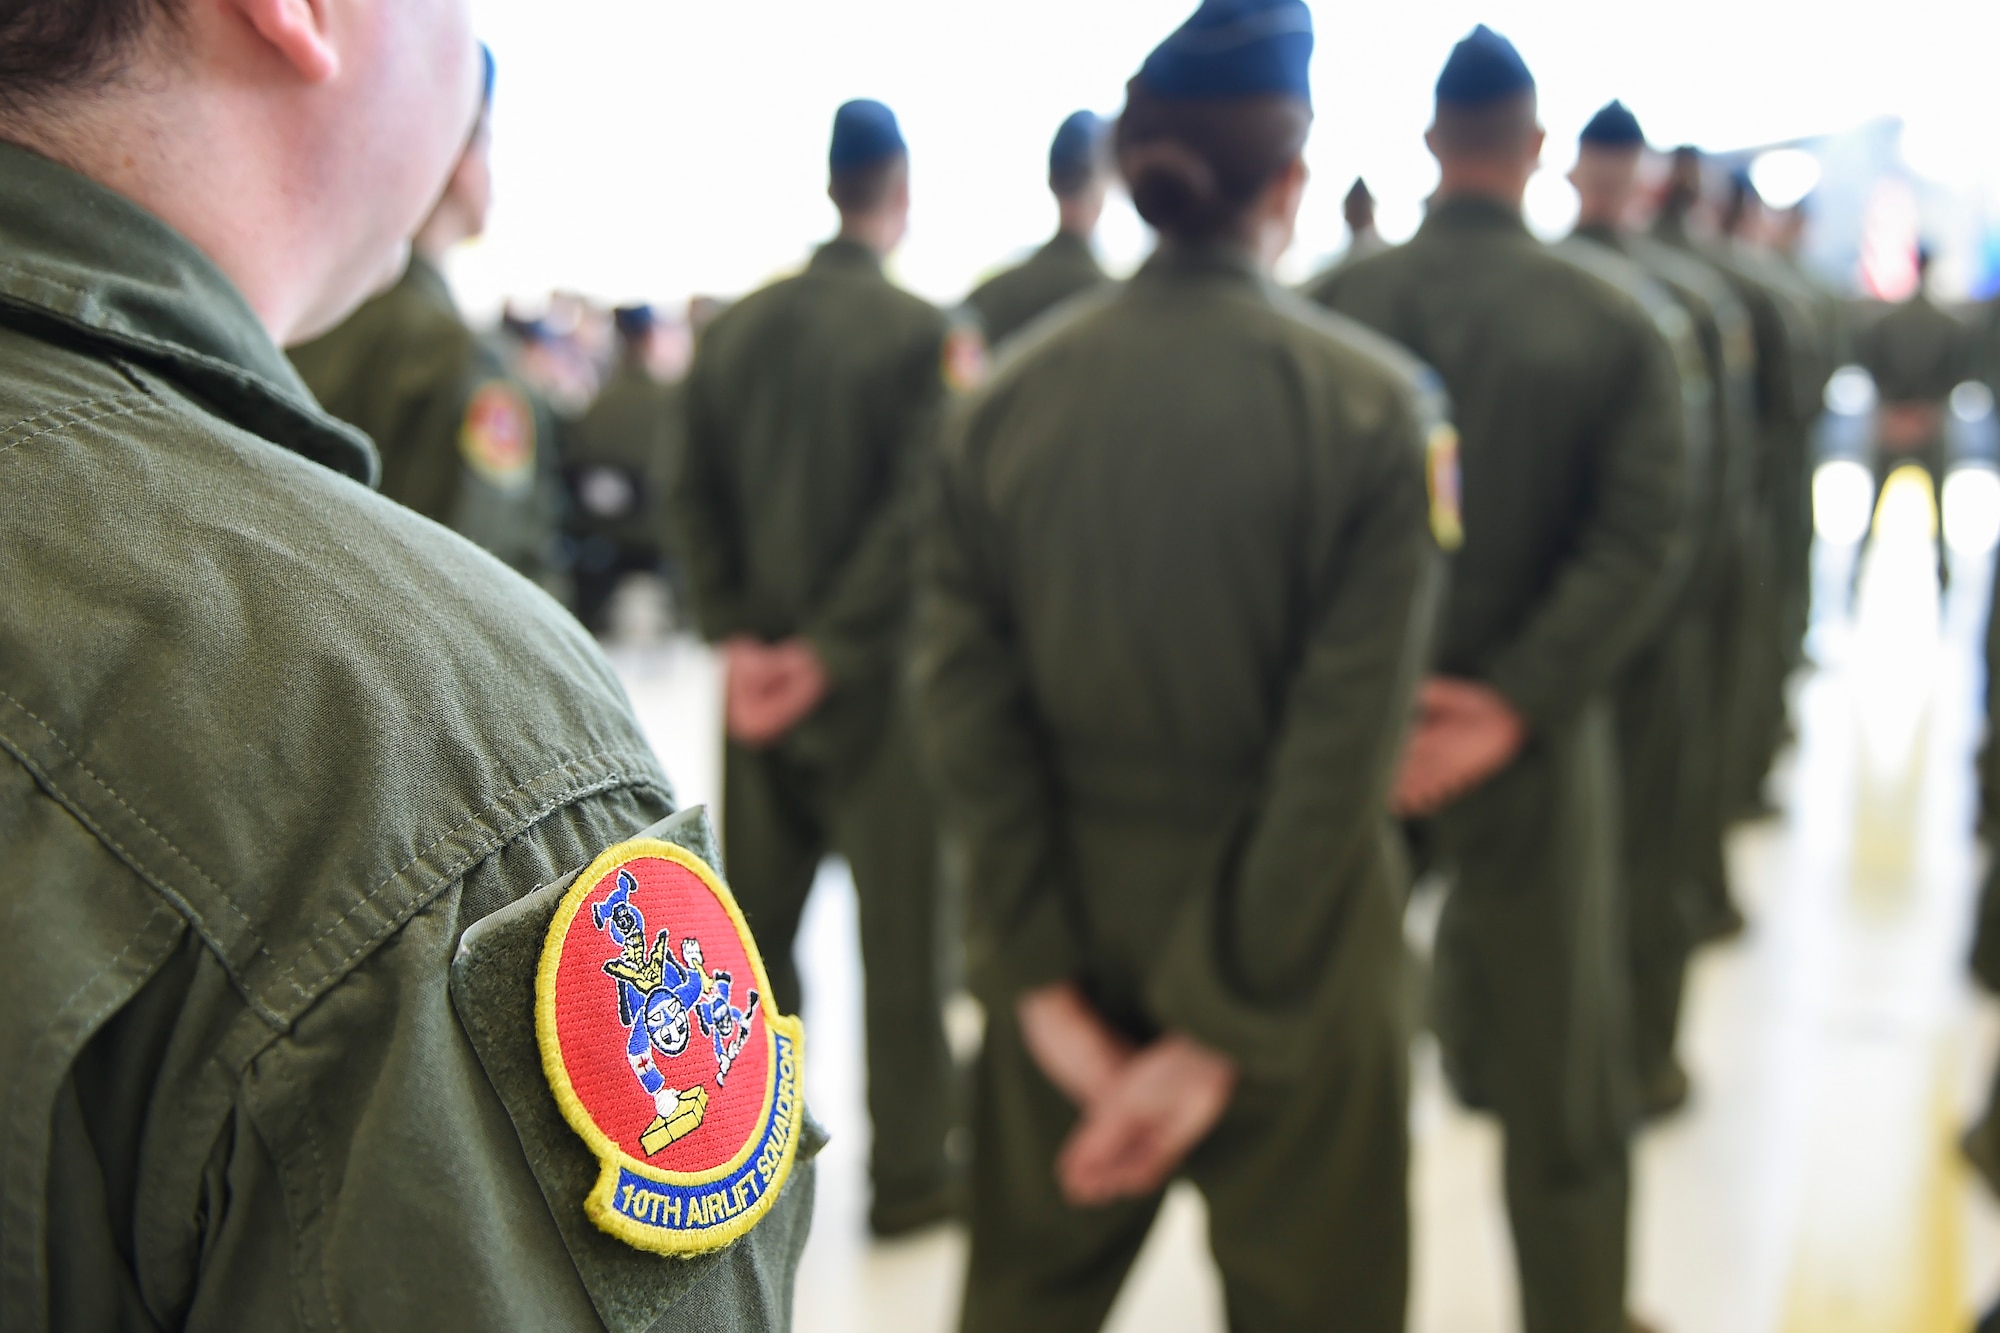 Members of the 10th Airlift Squadron stand in formation during their unit’s inactivation ceremony May 6, 2016, at Joint Base Lewis-McChord, Wash. The 10th AS inactivated after being based at McChord Field for nearly 13 years. (U.S. Air Force photo/Tech. Sgt. Sean Tobin)